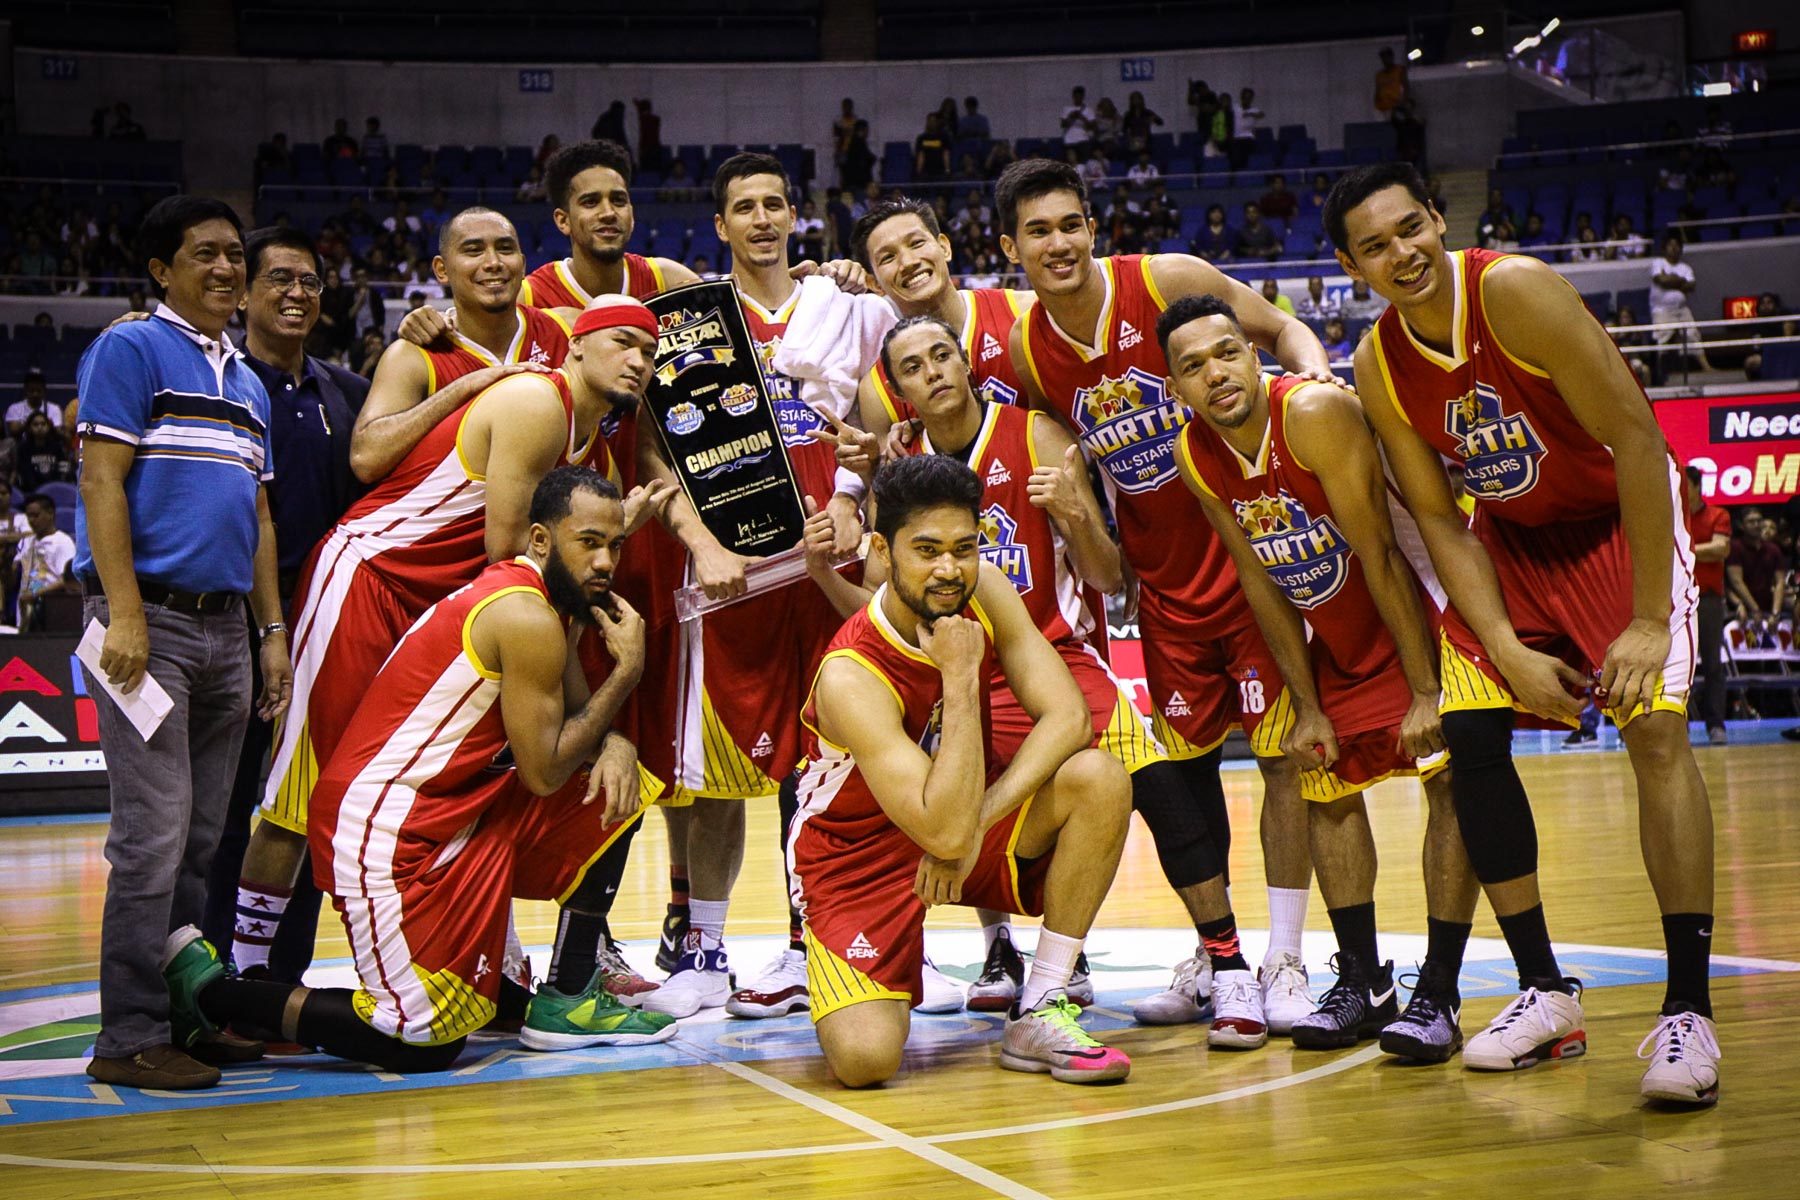 North reigns supreme in PBA All-Star Game